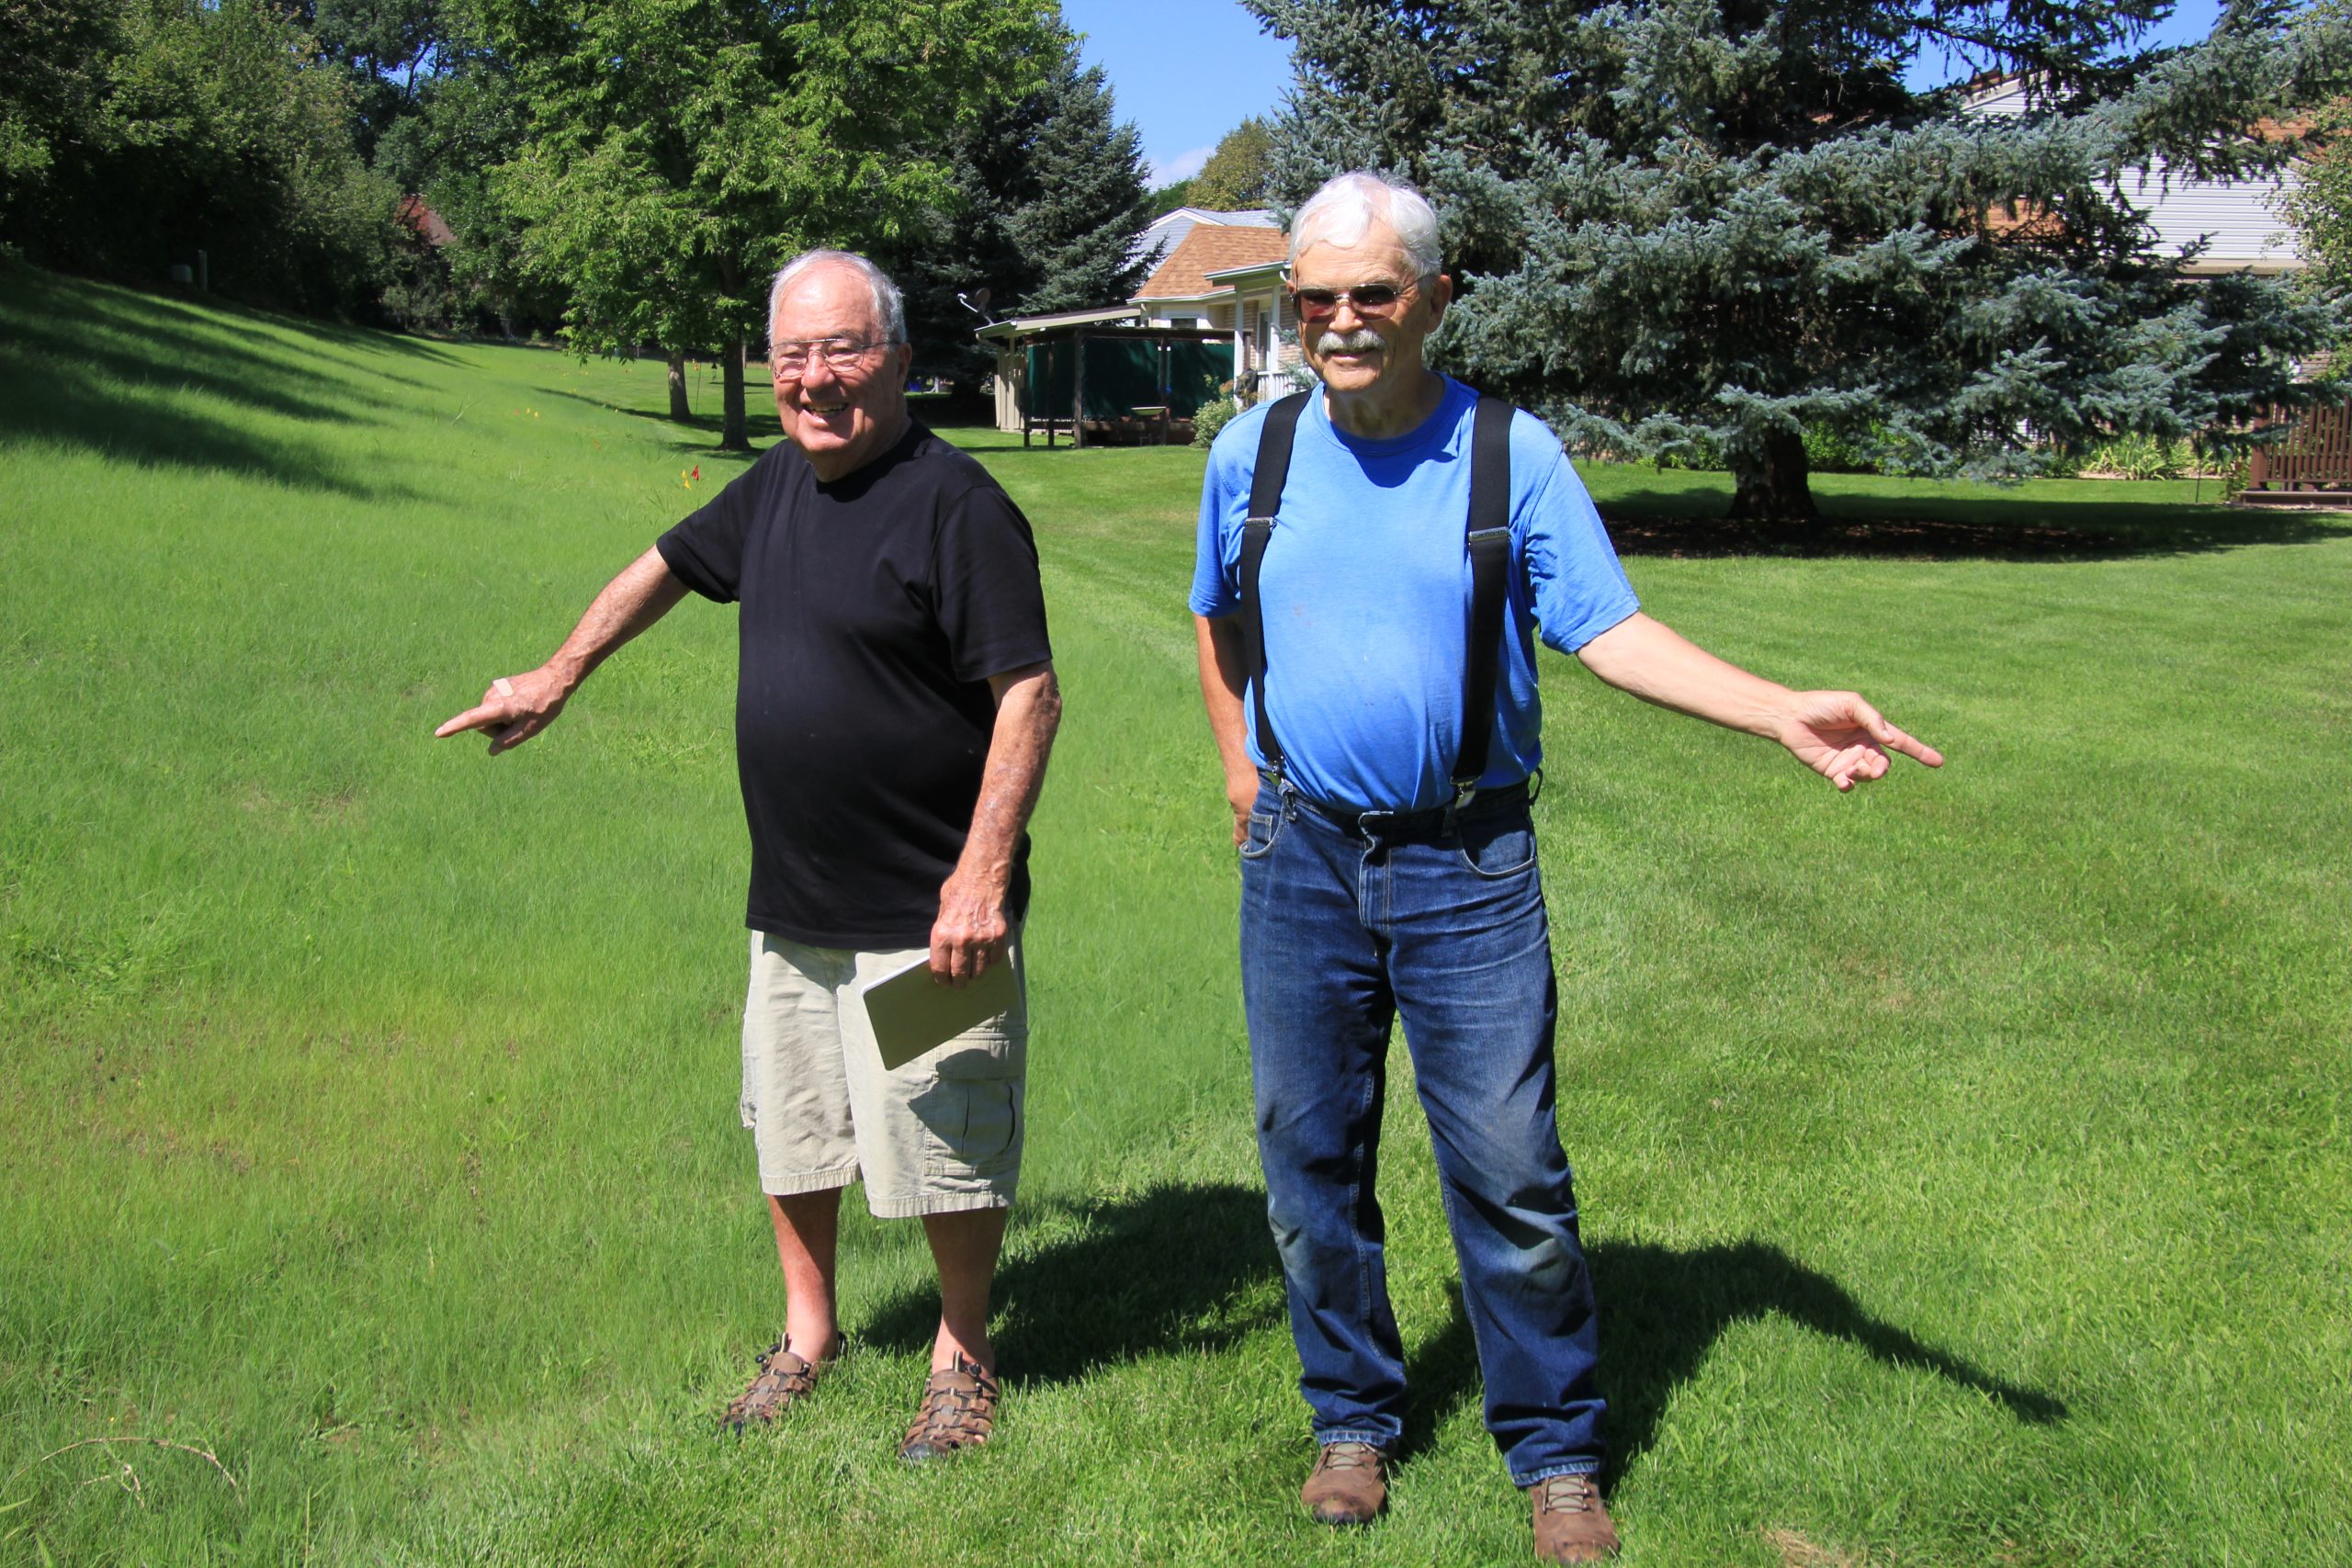 Ron Mettle, left, and Sandy Bertch replaced thirsty turf with low-water native species at the edge of their HOA’s property in Greeley but hope to now expand replacements into other parts of the commons area.